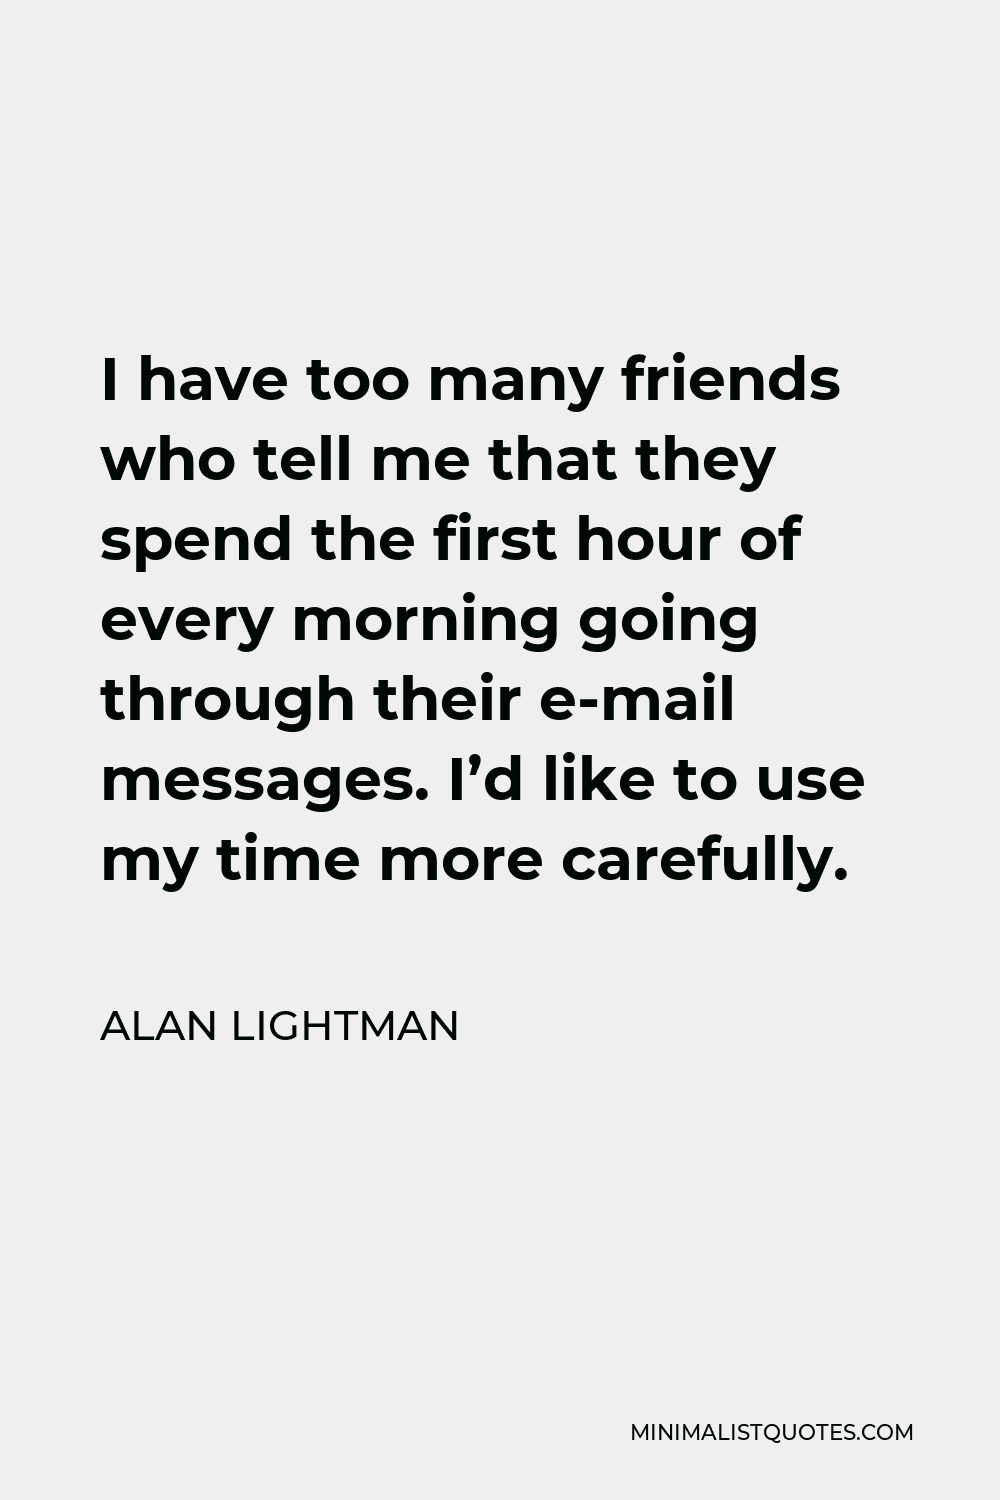 Alan Lightman Quote - I have too many friends who tell me that they spend the first hour of every morning going through their e-mail messages. I’d like to use my time more carefully.